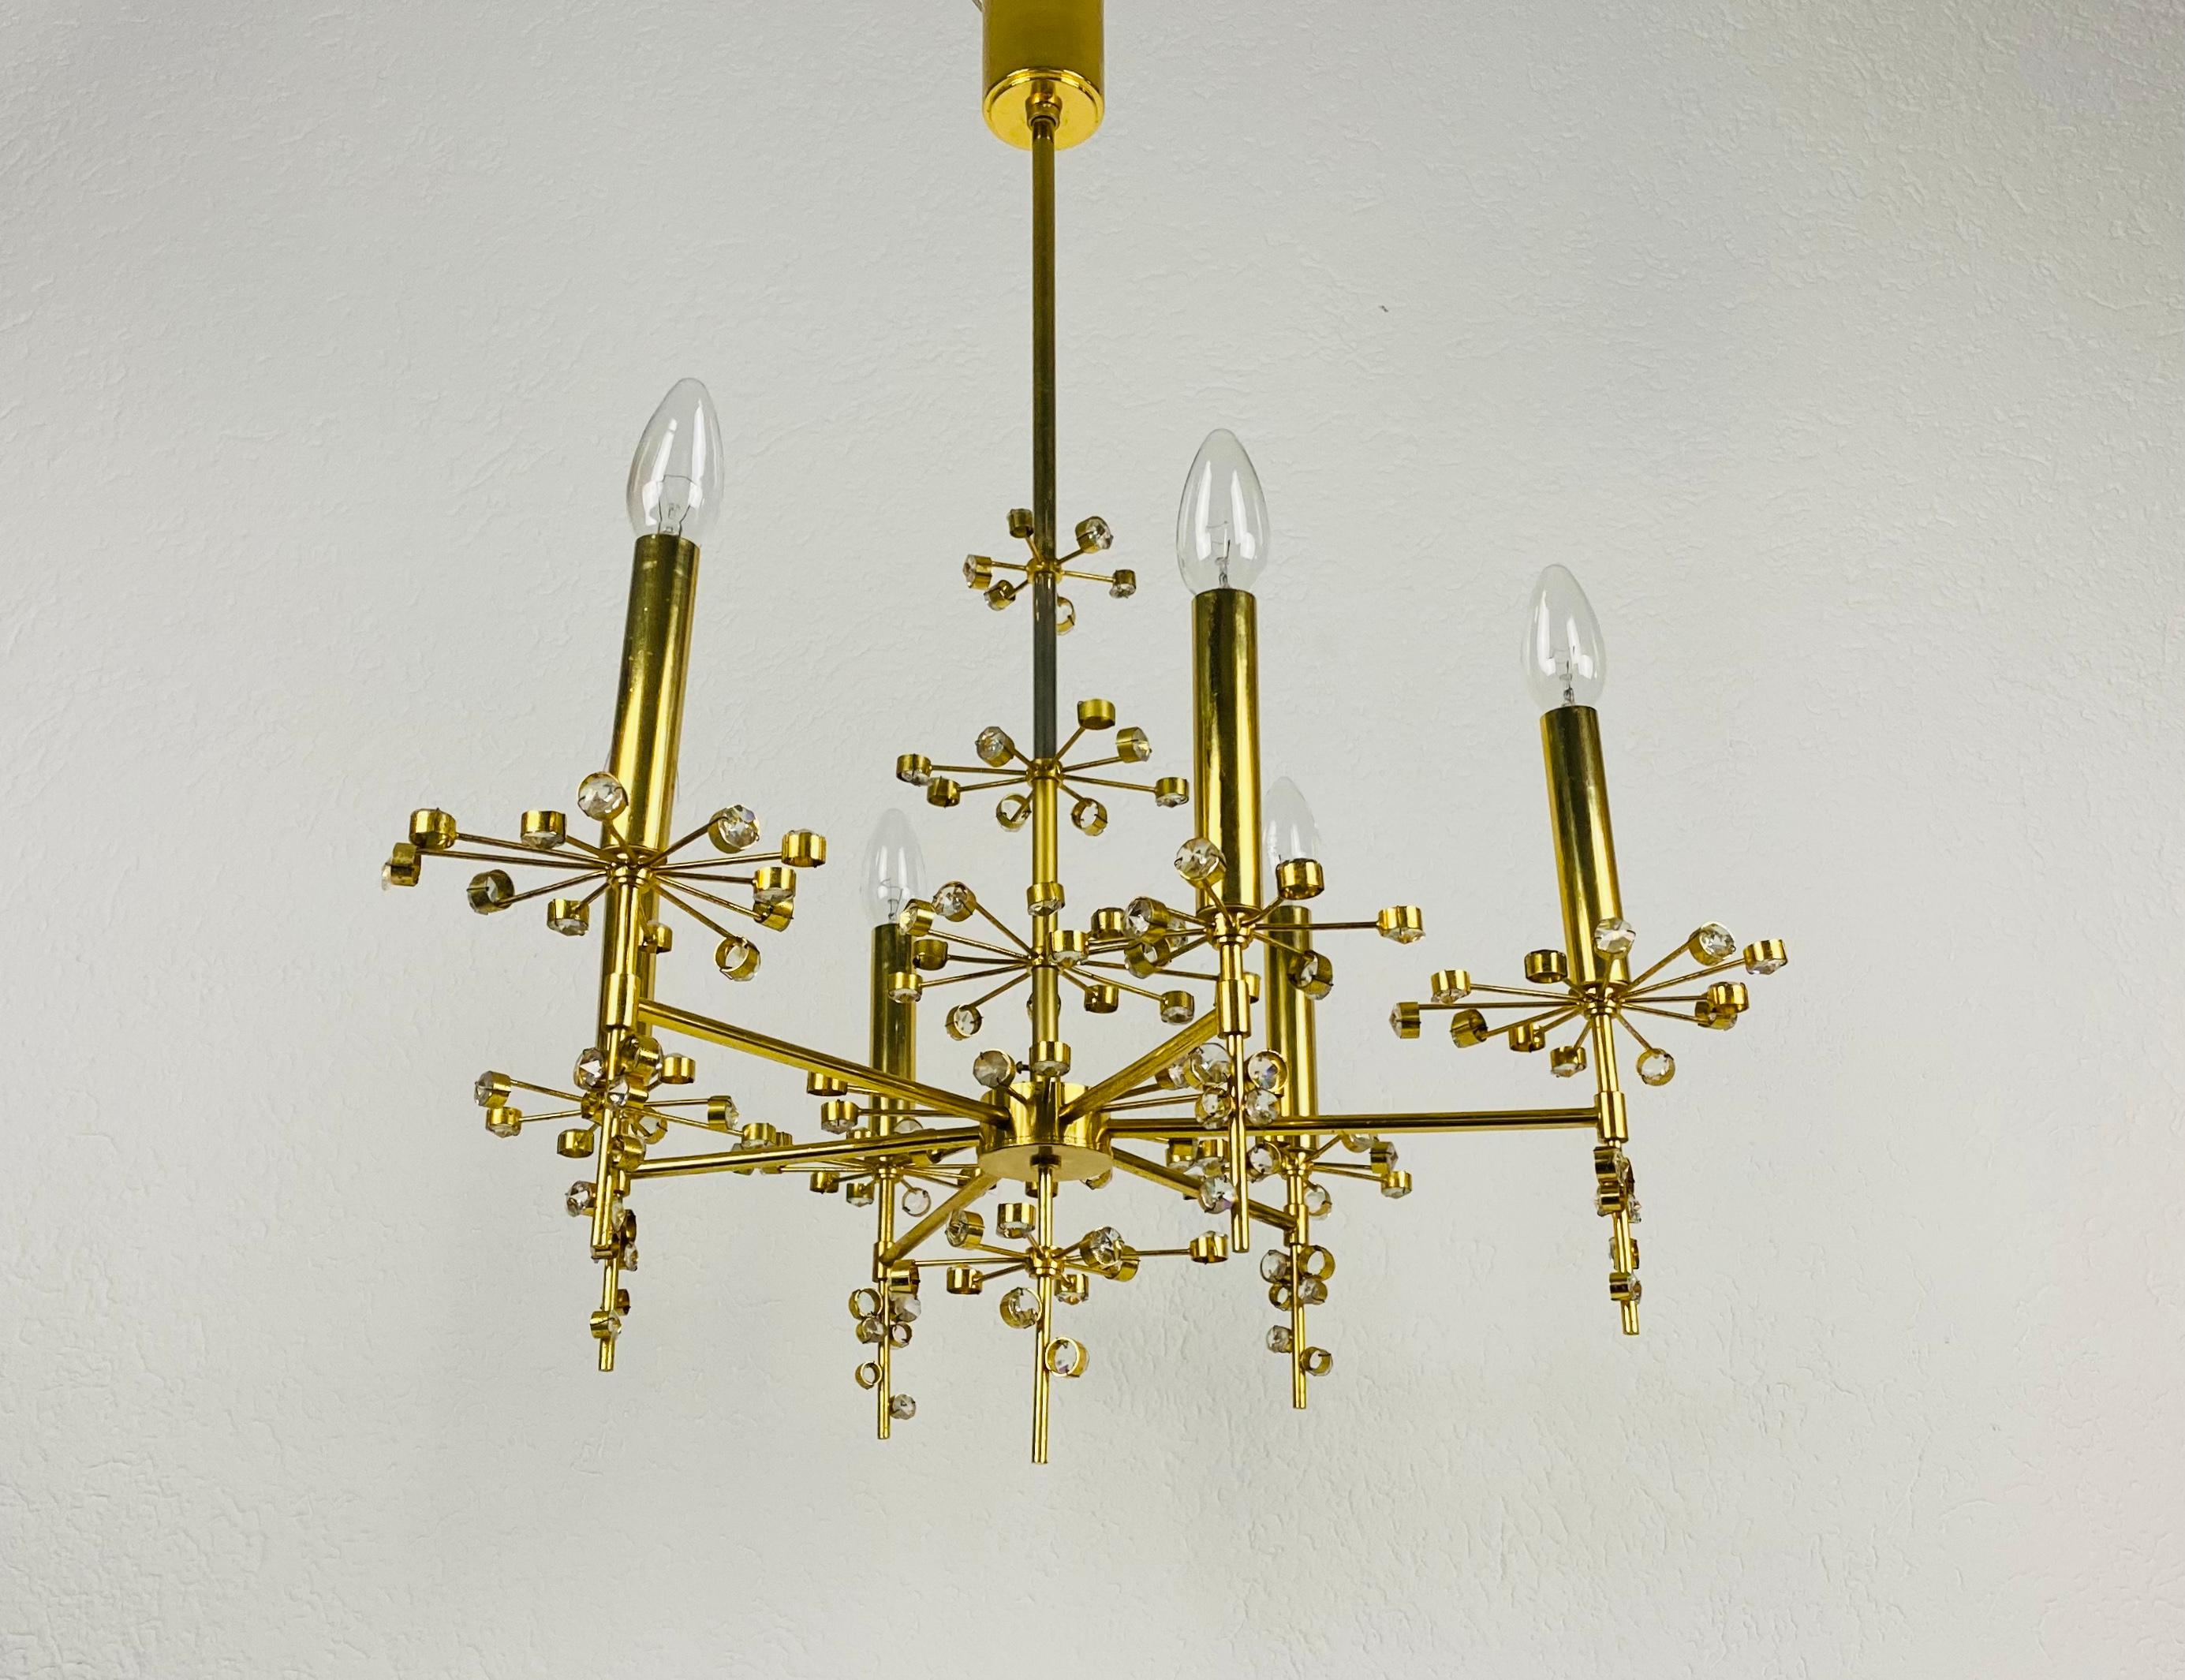 Amazing chandelier made in the 1960s by Palwa. Chrystal glasses with 24k gold plated body.

The light requires E14 light bulbs. Very good vintage condition. Works both on 120/220V.

Free worldwide express shipping.